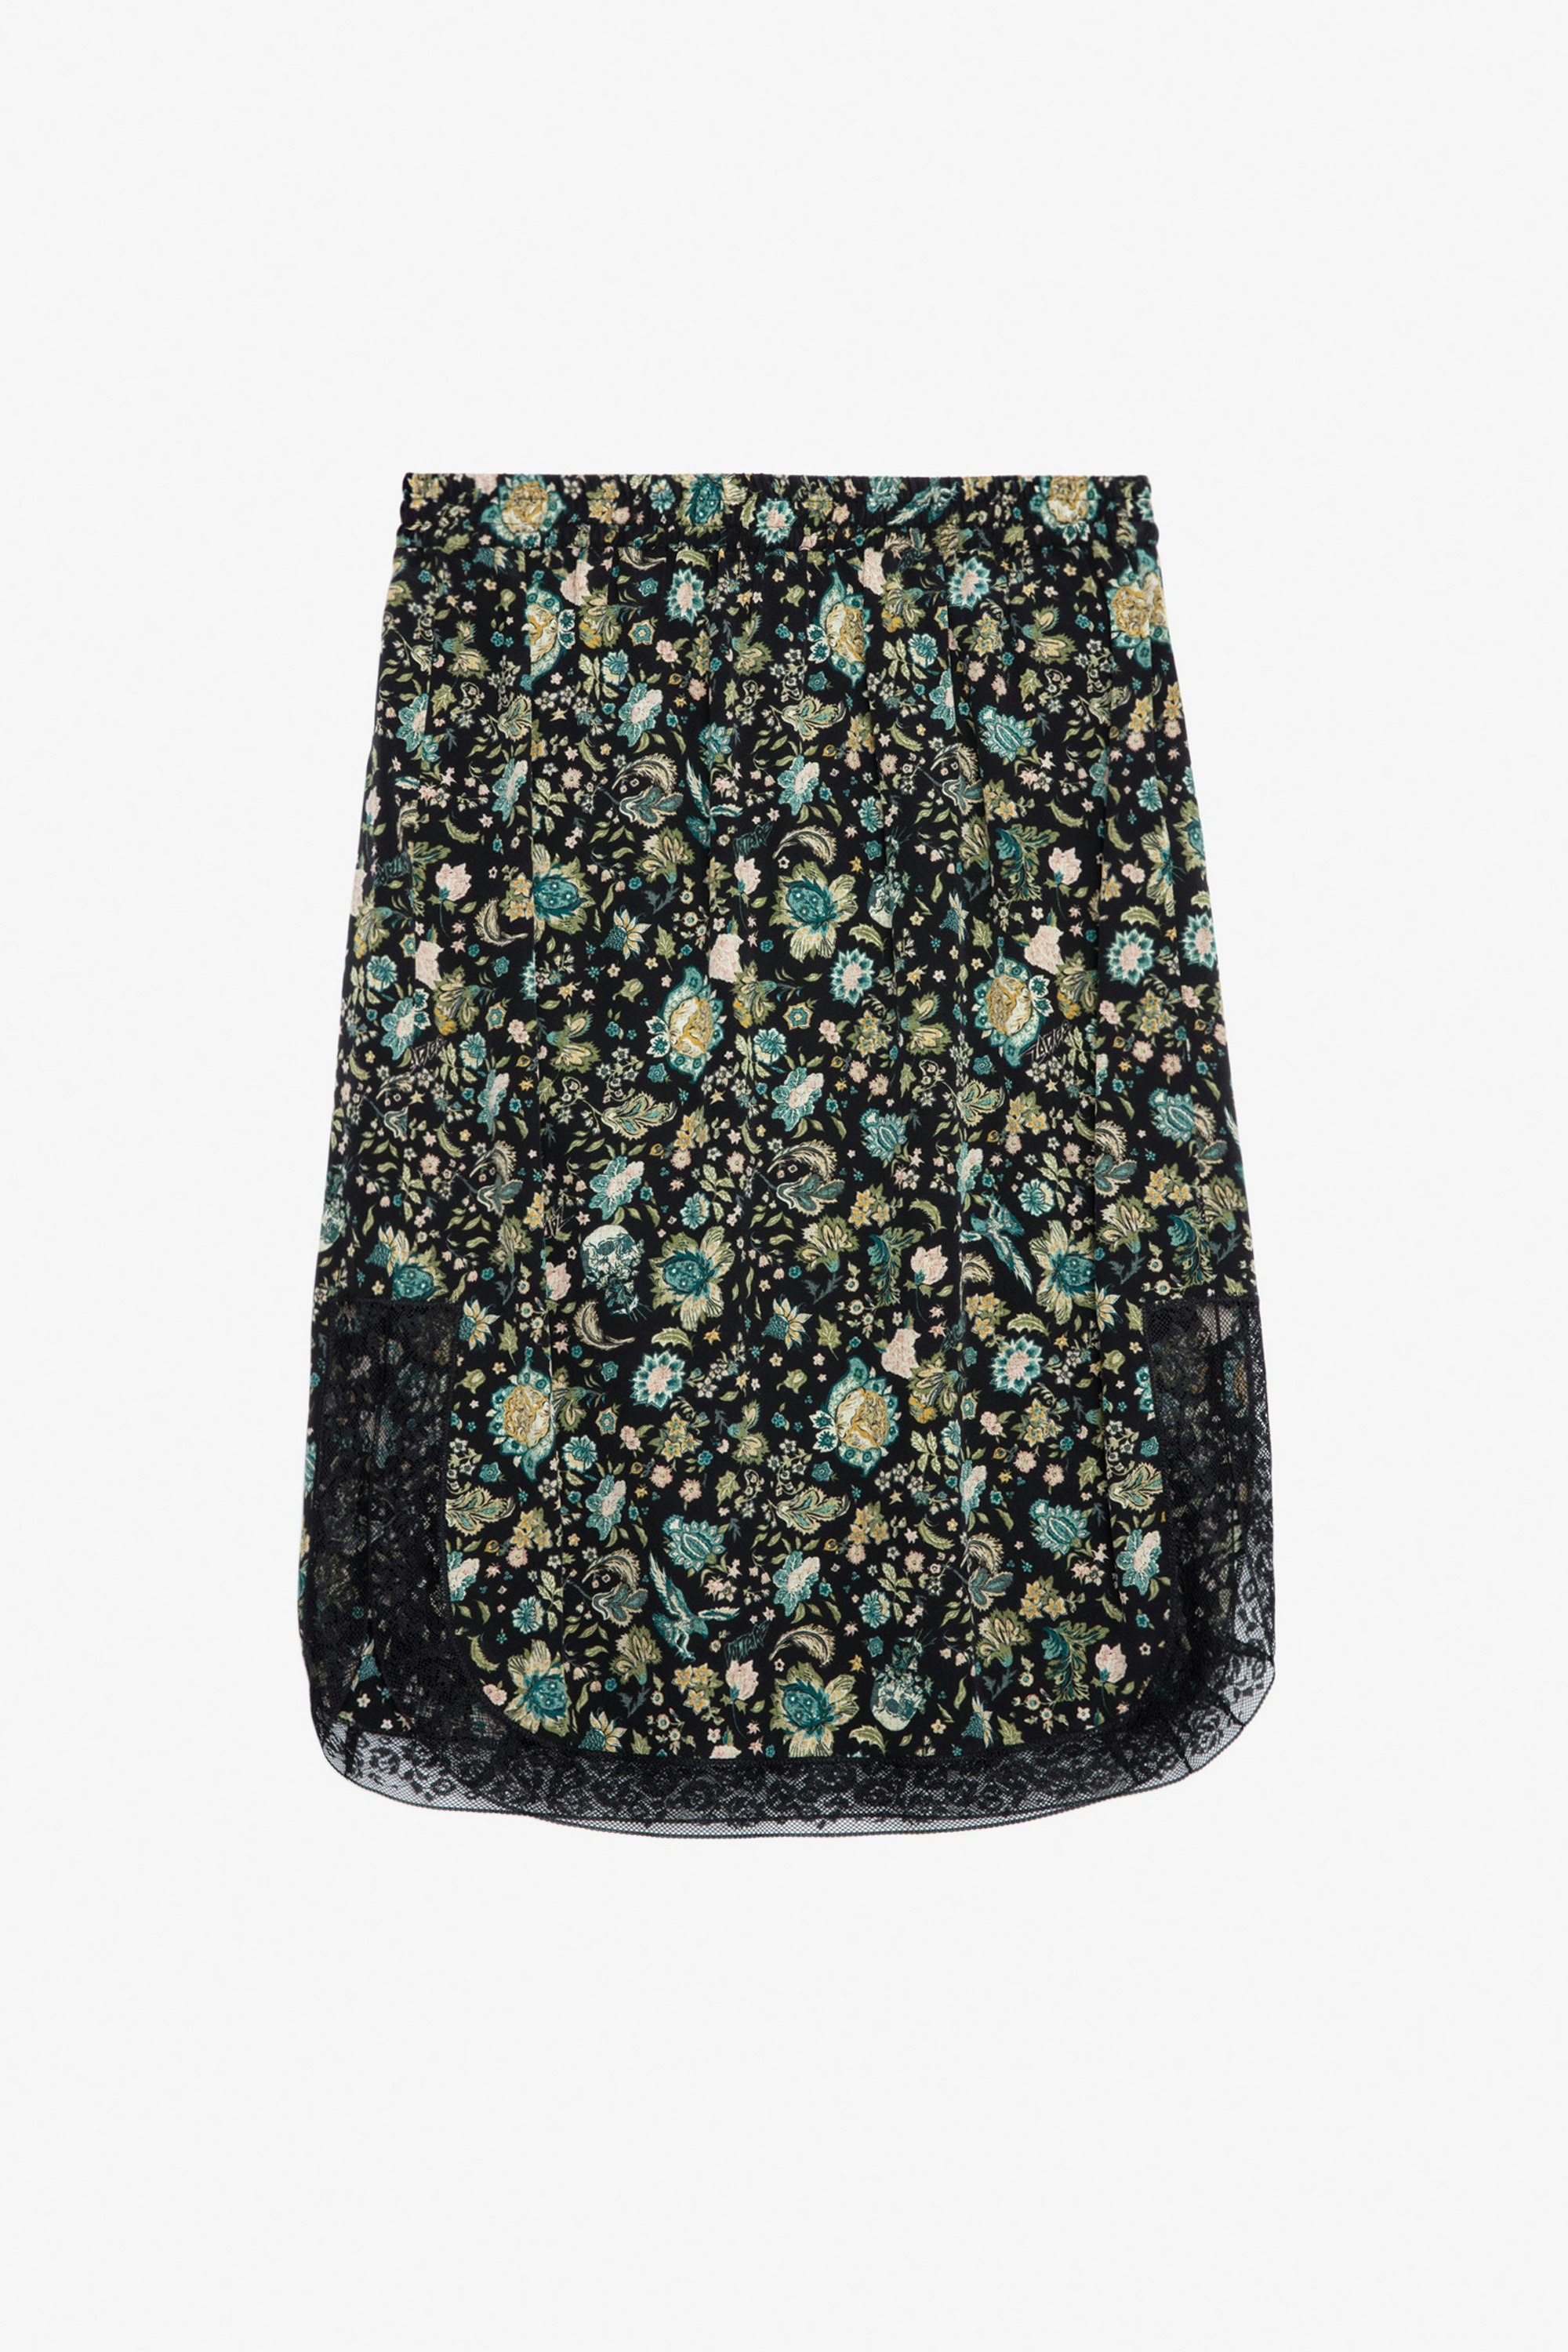 Jozy Silk Skirt - Women’s black silk lingerie-style midi skirt with split, floral print and lace trim.